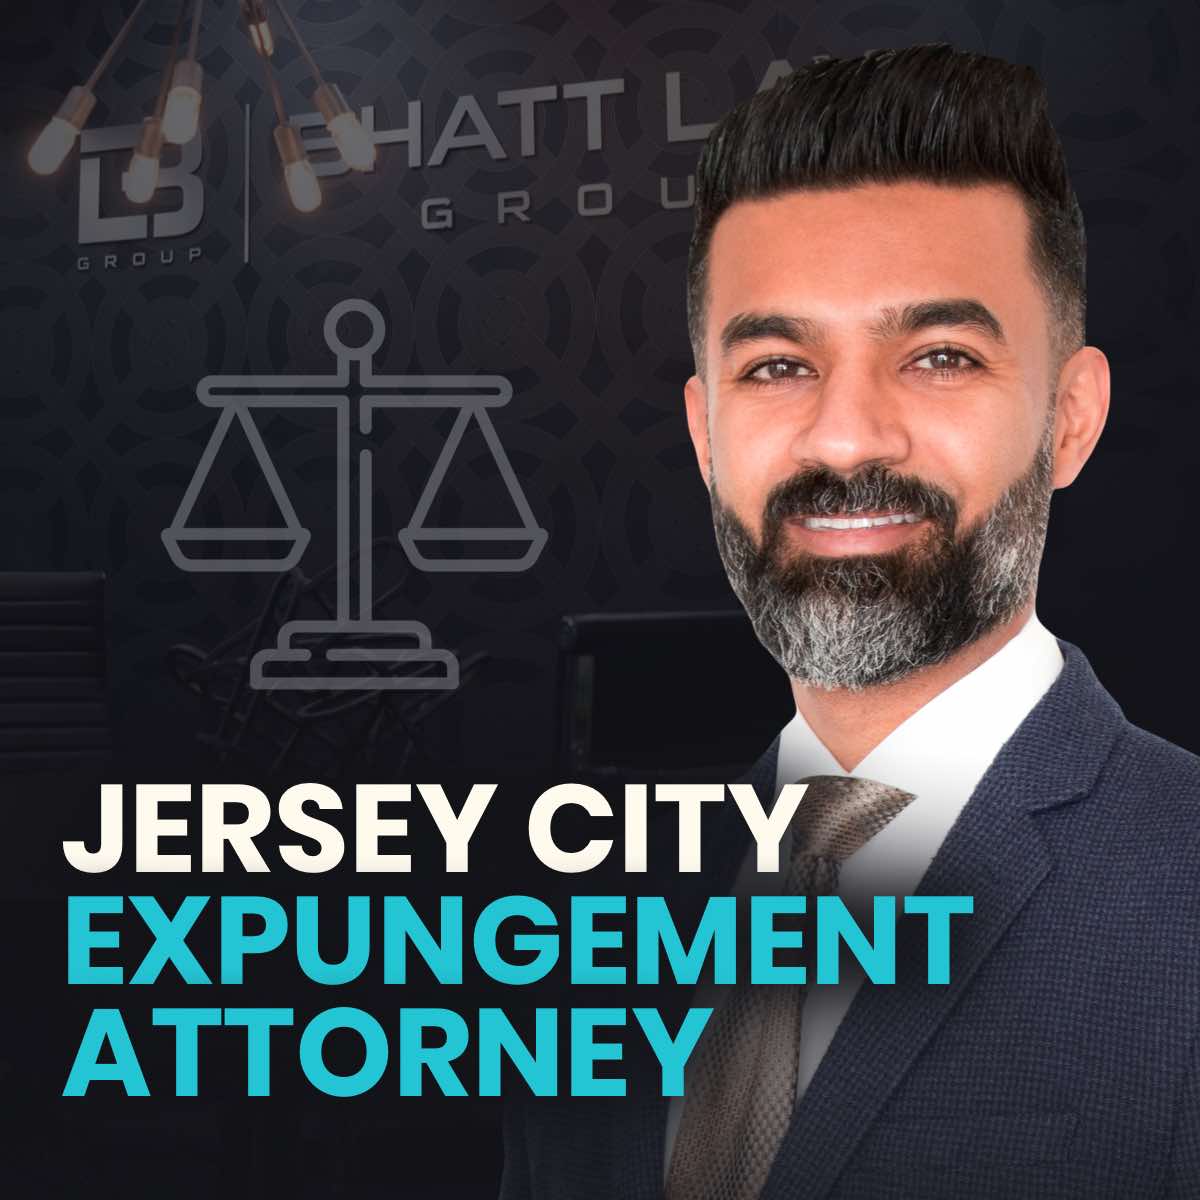 Jersey City Expungement Attorney